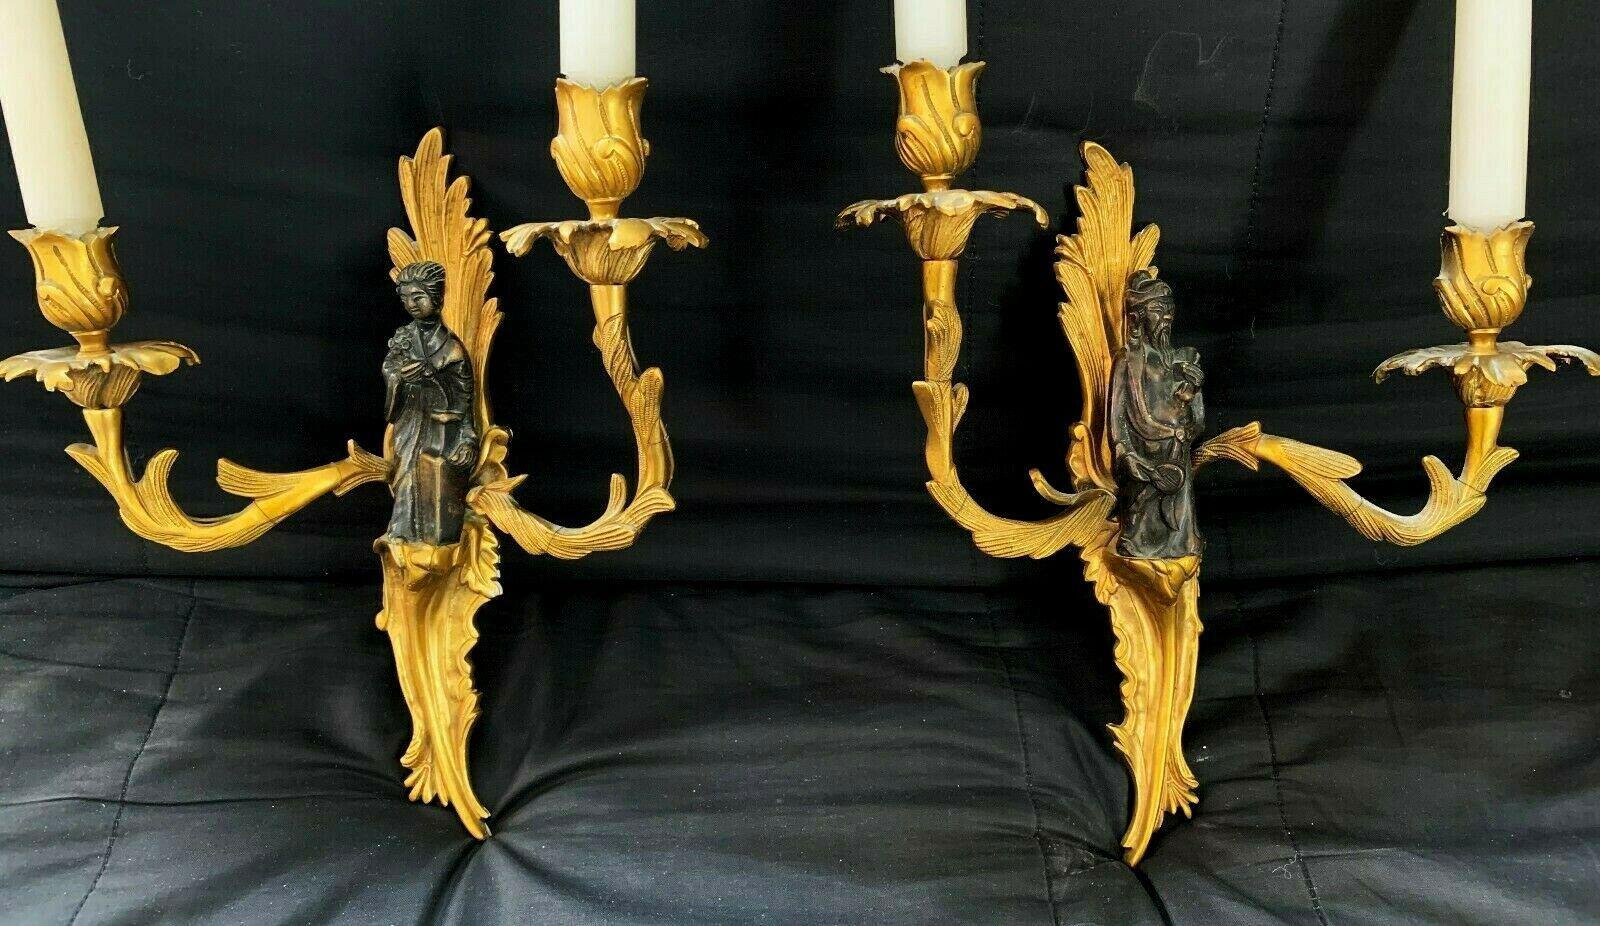 Pair French Antique Gilt & Patinated Bronze Chinoiserie Figural Wall Sconces. Louis XV Rococo style. Found these while on a buying trip to Paris. Faux candles with light socket at top. Very elegant.